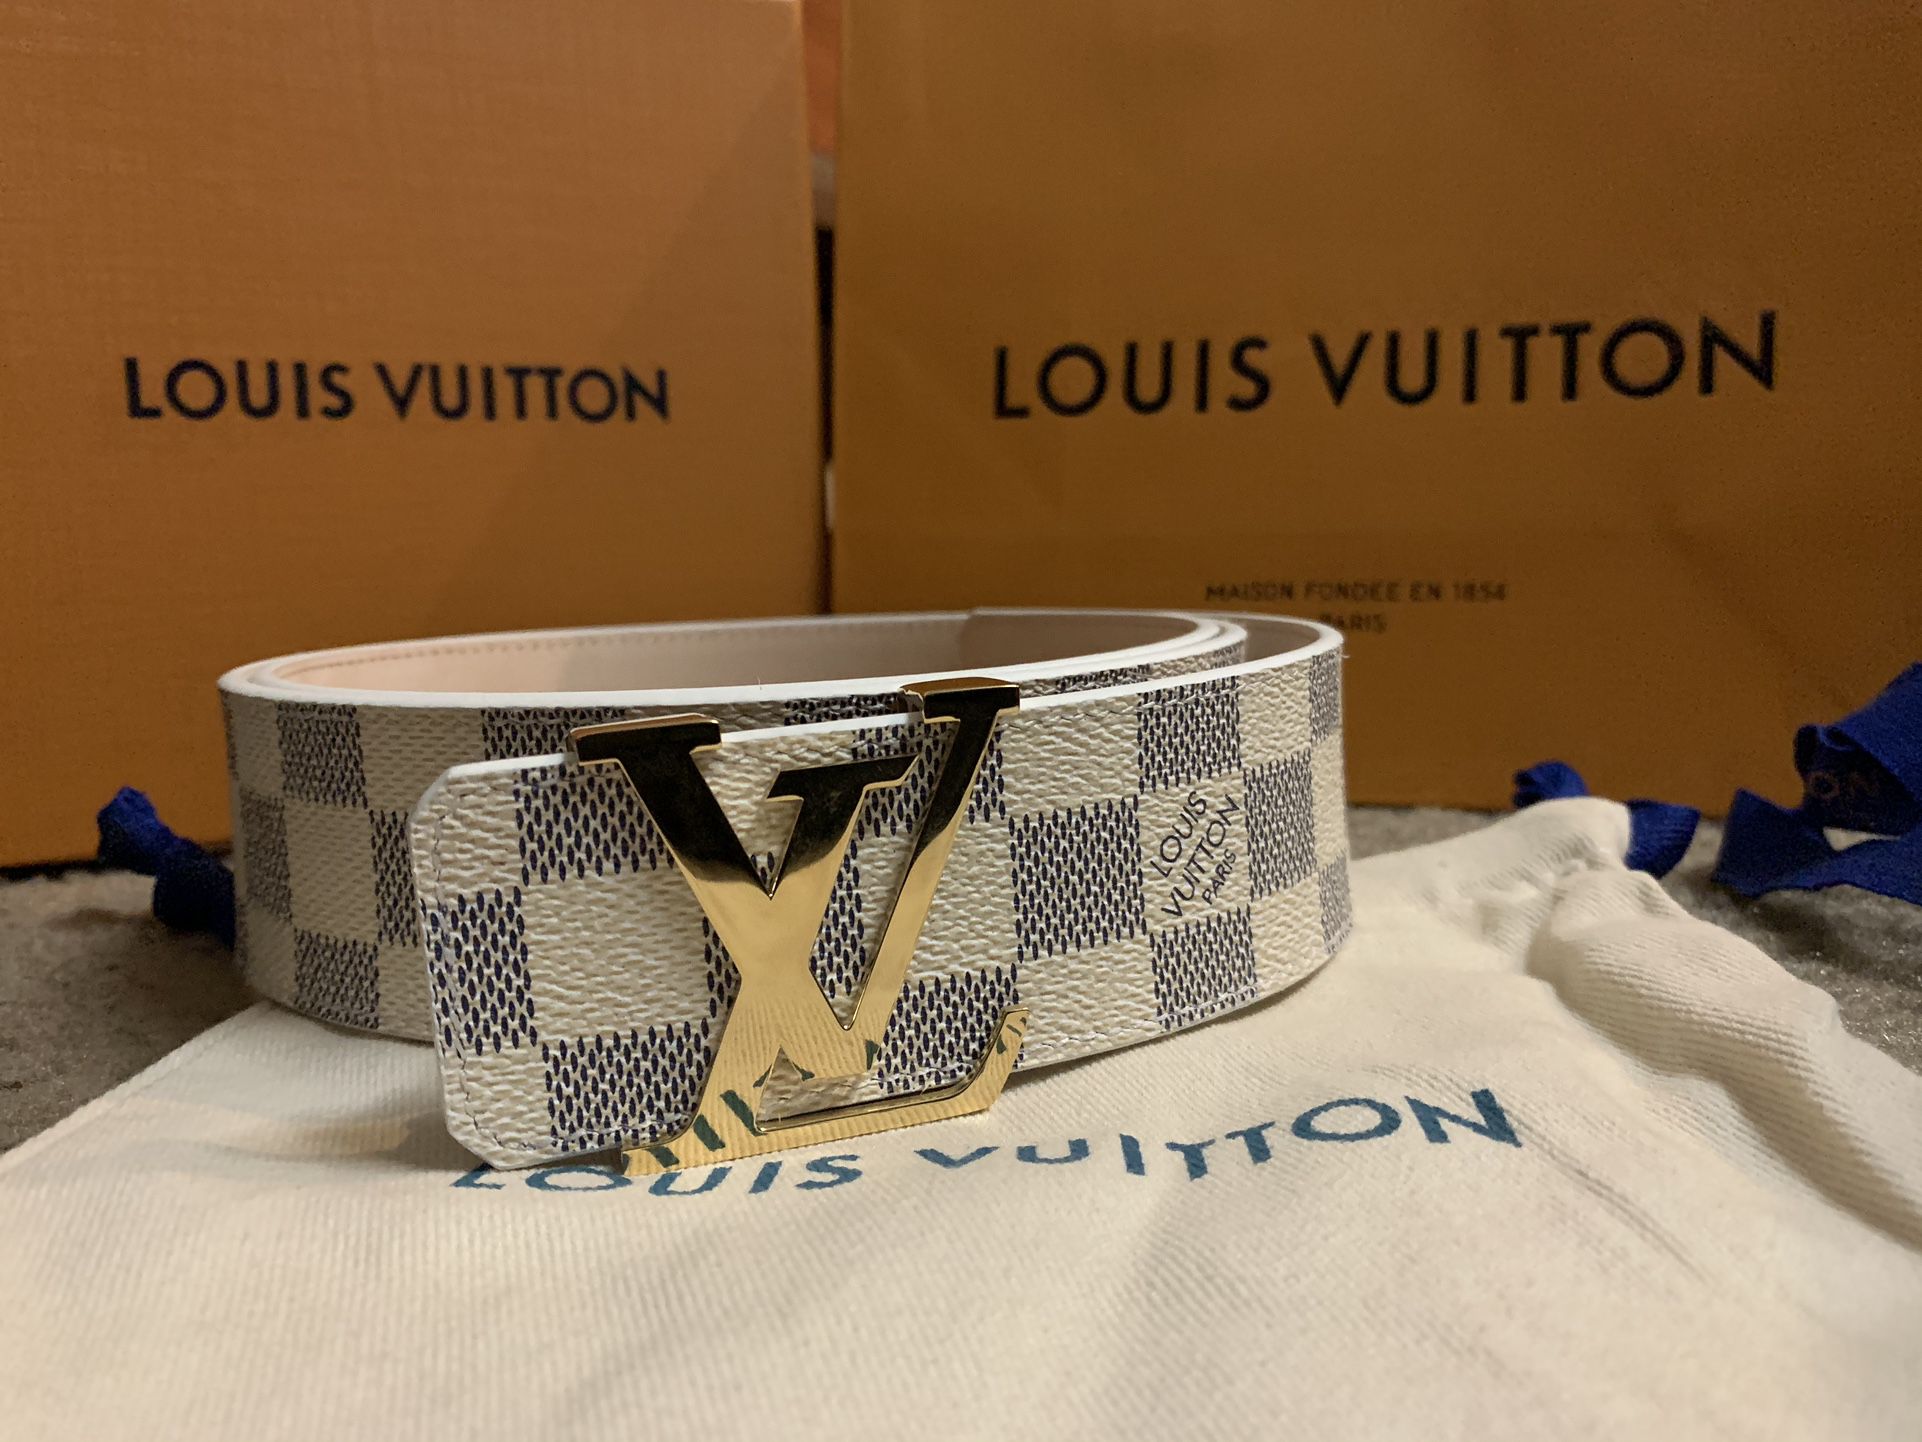 VUITTON INITIAL DAMIER AZUR BELT FOR MEN M9608 SIZE 36-38 100% AUTHENTIC  WITH BOXES AND BOOKS for Sale in Pickerington, OH - OfferUp